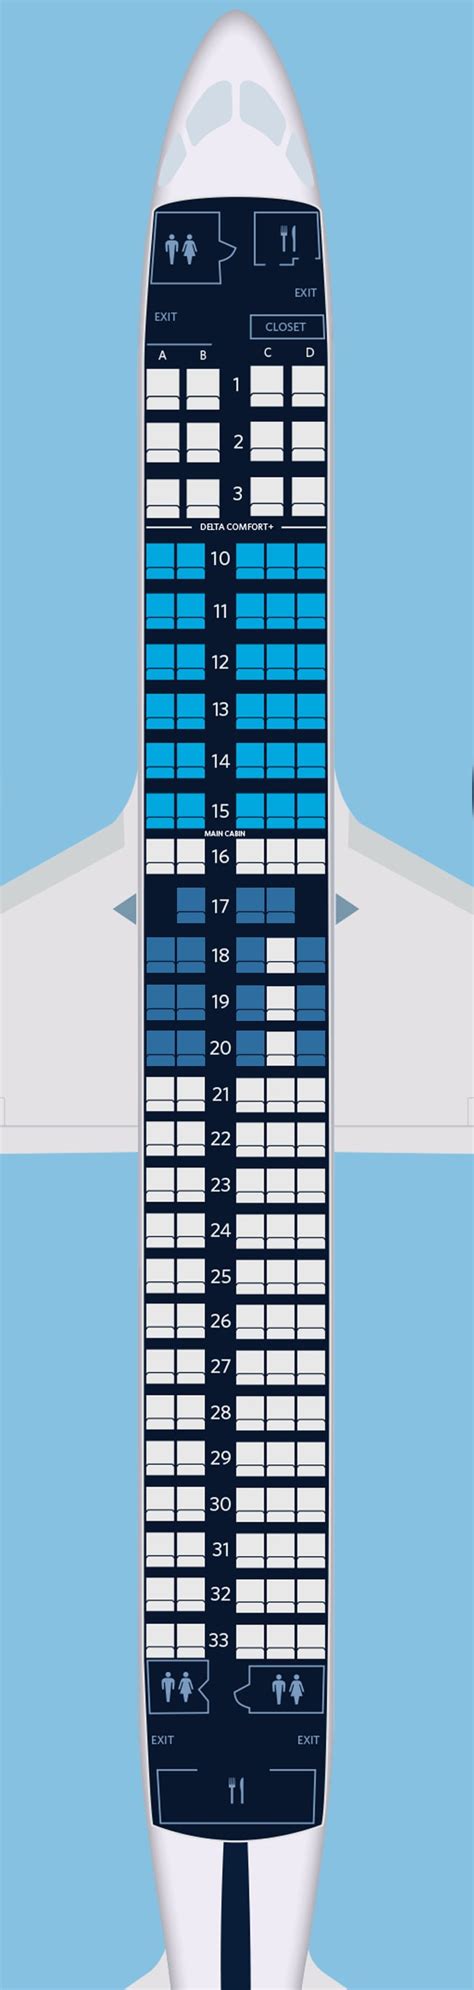 Airbus A Jet Seating Chart Image To U